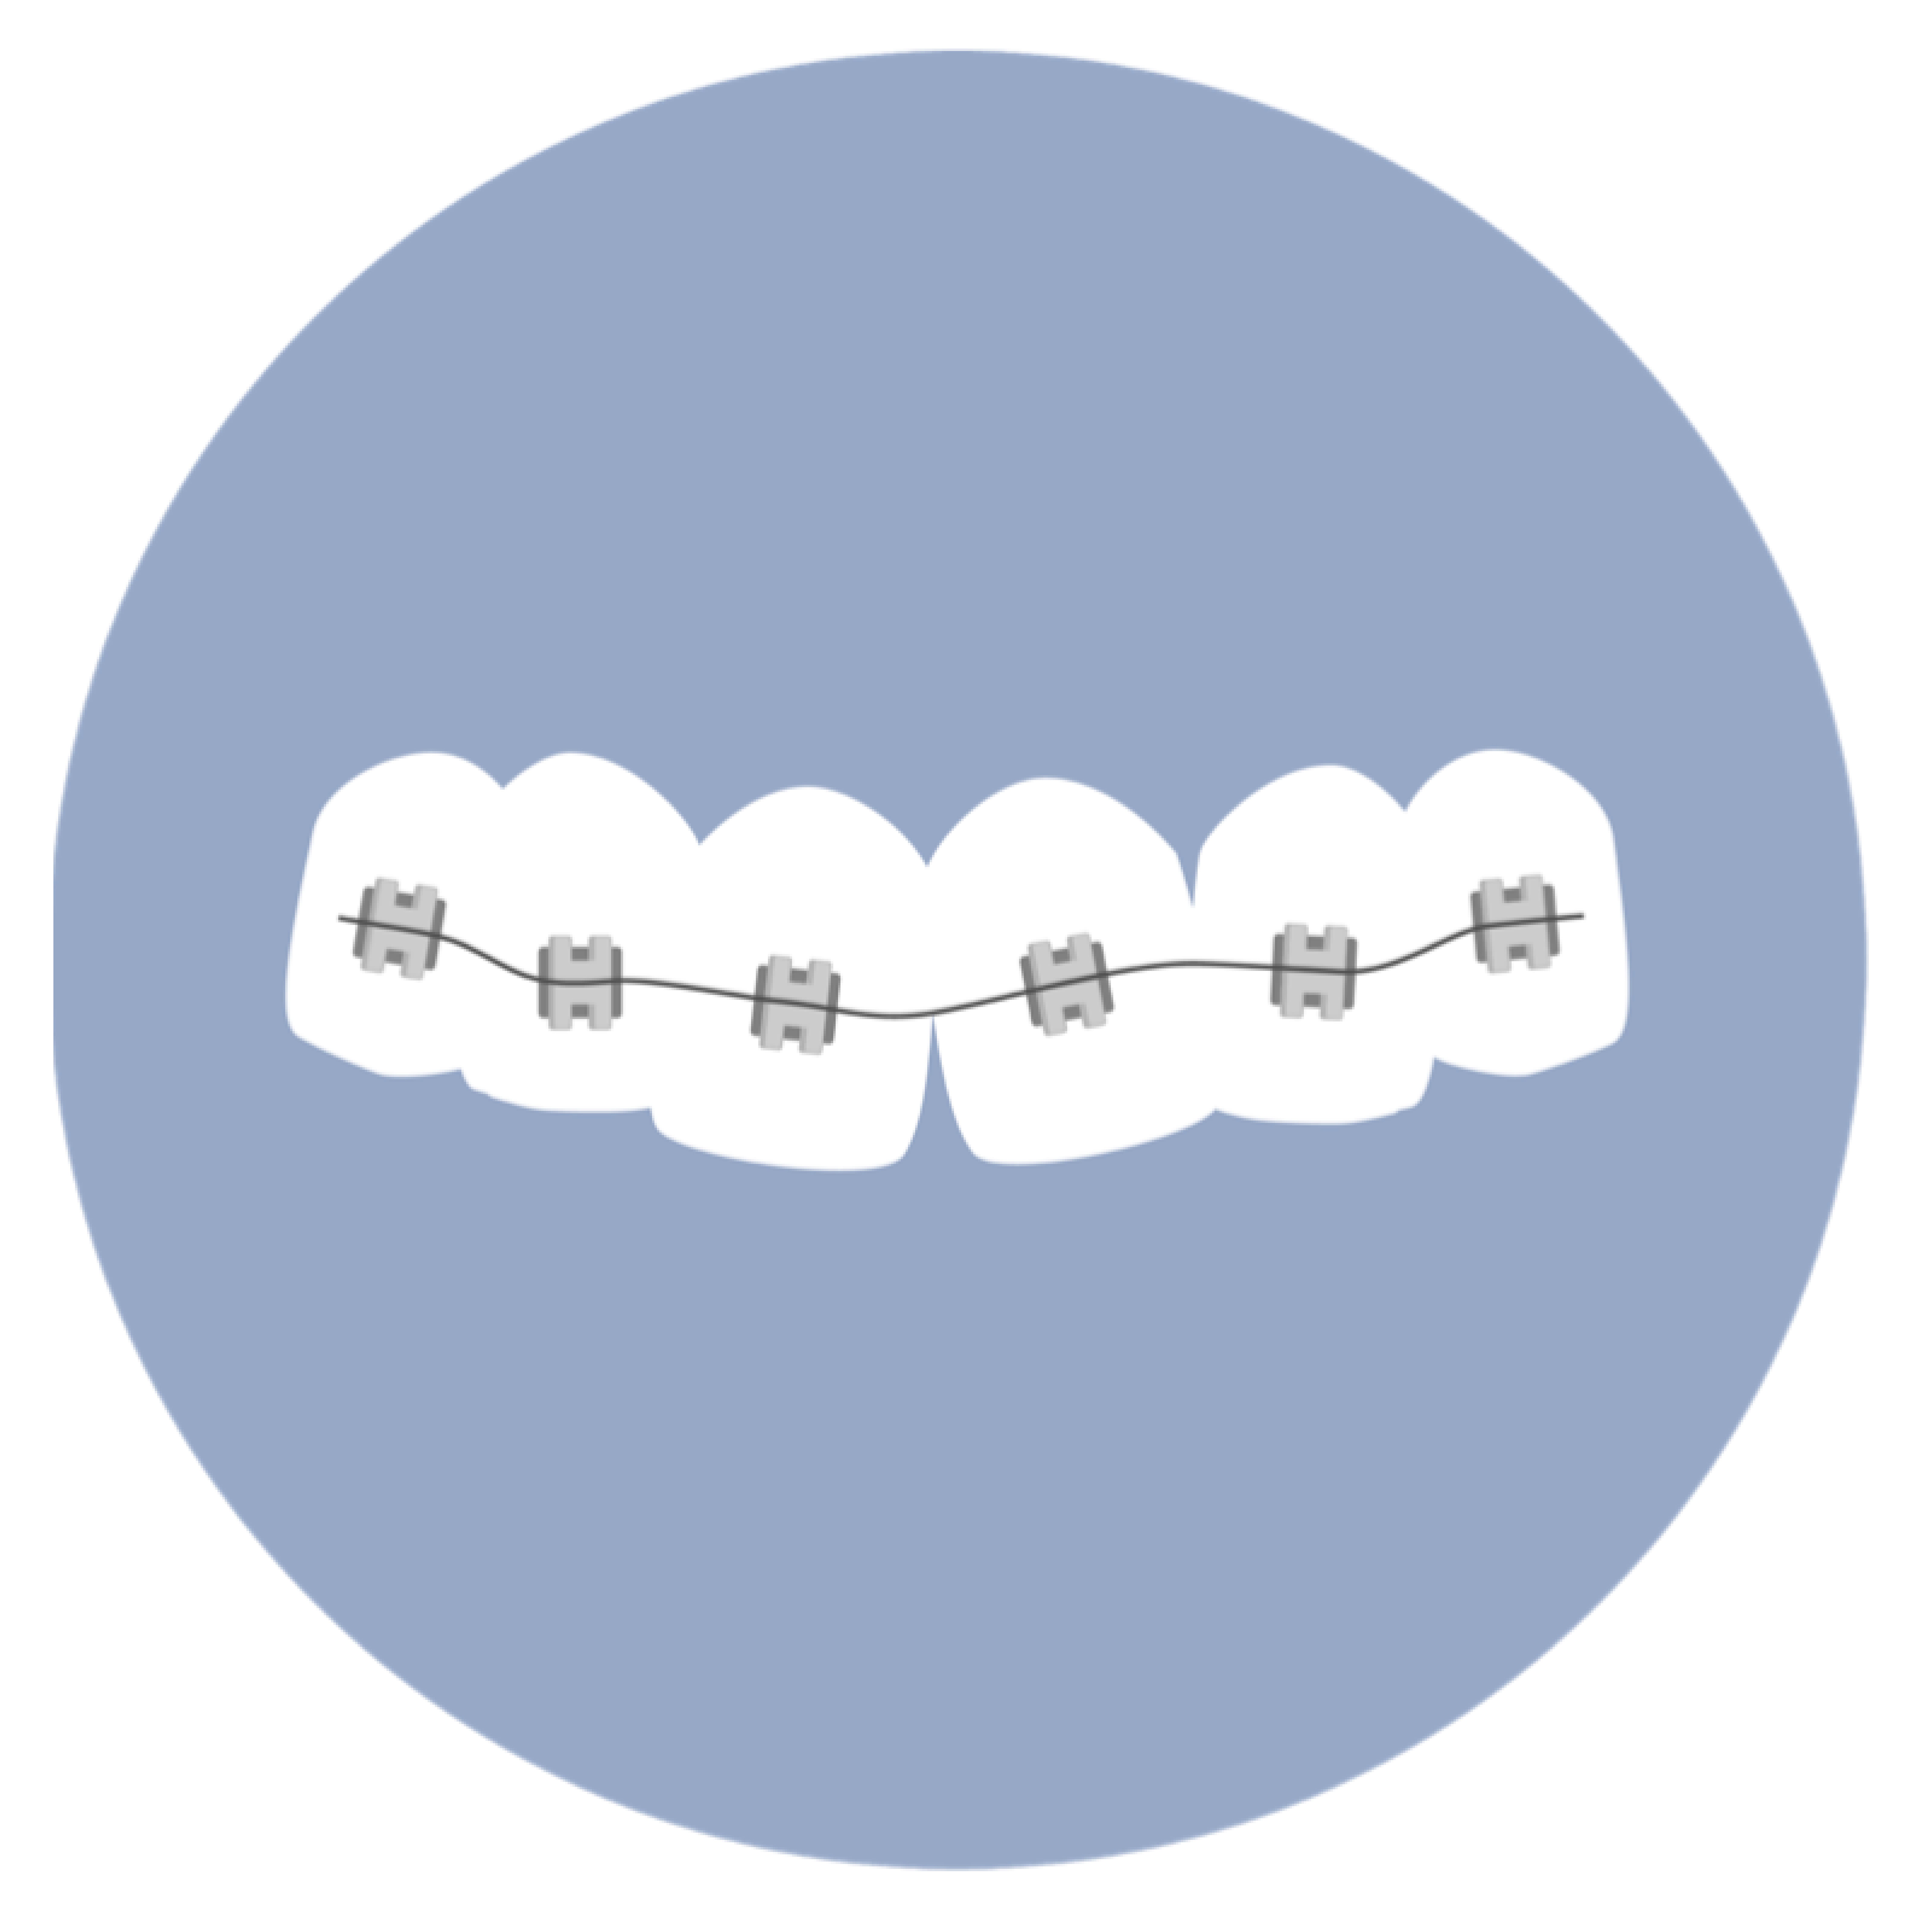 Getting started with braces. Crooked teeth with braces illustration